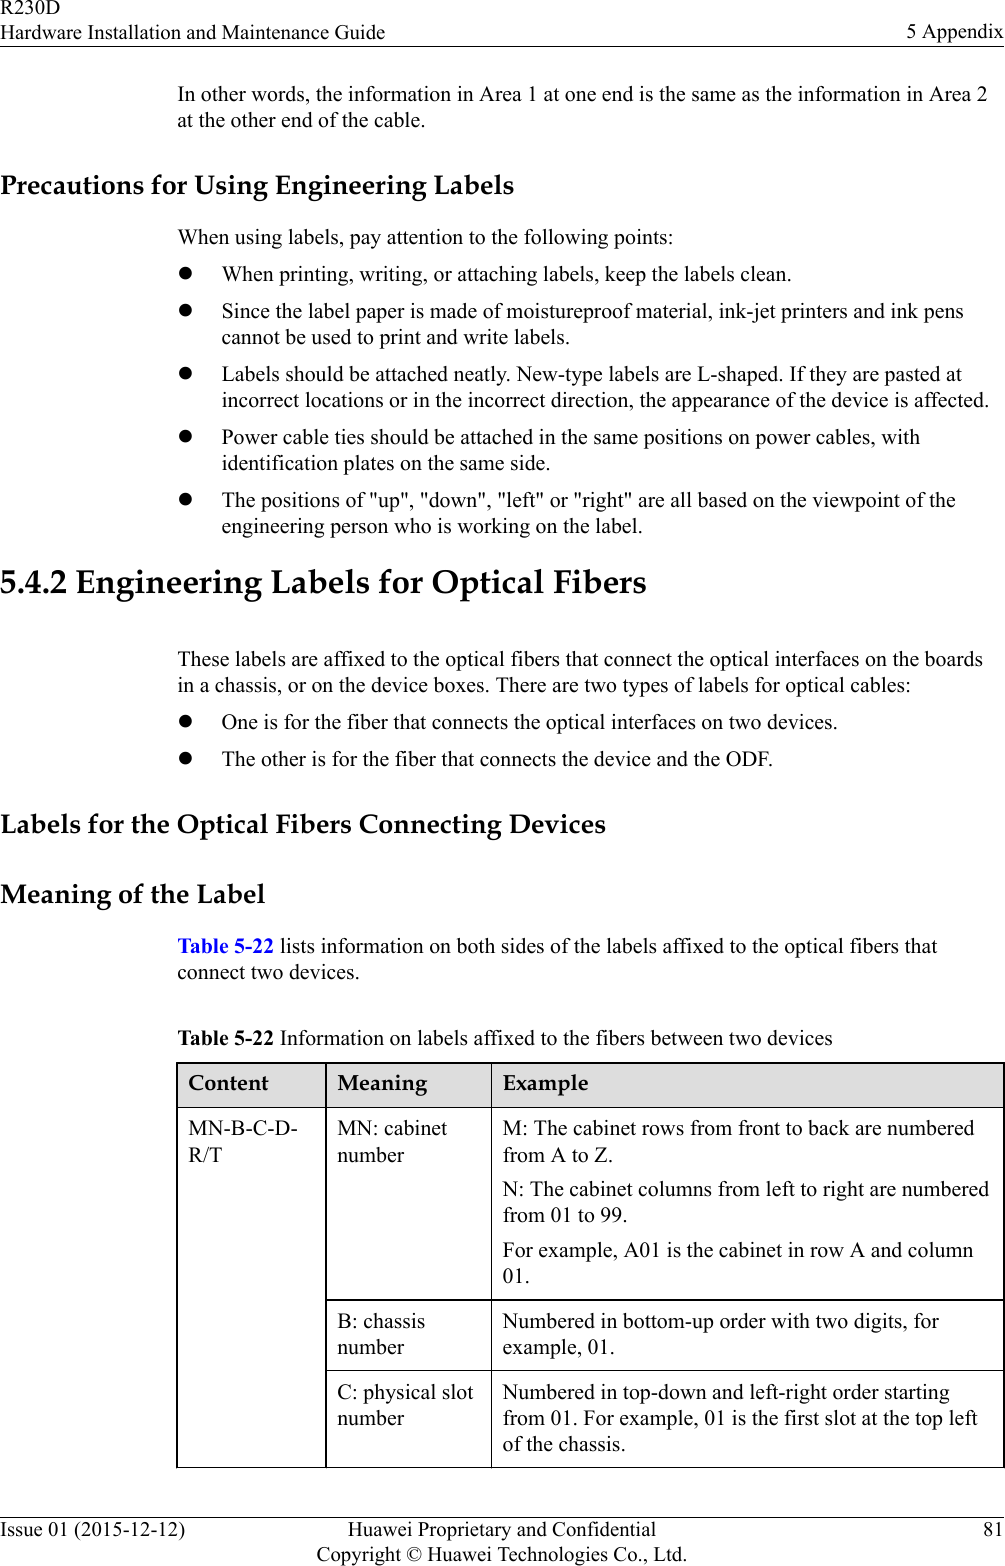 In other words, the information in Area 1 at one end is the same as the information in Area 2at the other end of the cable.Precautions for Using Engineering LabelsWhen using labels, pay attention to the following points:lWhen printing, writing, or attaching labels, keep the labels clean.lSince the label paper is made of moistureproof material, ink-jet printers and ink penscannot be used to print and write labels.lLabels should be attached neatly. New-type labels are L-shaped. If they are pasted atincorrect locations or in the incorrect direction, the appearance of the device is affected.lPower cable ties should be attached in the same positions on power cables, withidentification plates on the same side.lThe positions of &quot;up&quot;, &quot;down&quot;, &quot;left&quot; or &quot;right&quot; are all based on the viewpoint of theengineering person who is working on the label.5.4.2 Engineering Labels for Optical FibersThese labels are affixed to the optical fibers that connect the optical interfaces on the boardsin a chassis, or on the device boxes. There are two types of labels for optical cables:lOne is for the fiber that connects the optical interfaces on two devices.lThe other is for the fiber that connects the device and the ODF.Labels for the Optical Fibers Connecting DevicesMeaning of the LabelTable 5-22 lists information on both sides of the labels affixed to the optical fibers thatconnect two devices.Table 5-22 Information on labels affixed to the fibers between two devicesContent Meaning ExampleMN-B-C-D-R/TMN: cabinetnumberM: The cabinet rows from front to back are numberedfrom A to Z.N: The cabinet columns from left to right are numberedfrom 01 to 99.For example, A01 is the cabinet in row A and column01.B: chassisnumberNumbered in bottom-up order with two digits, forexample, 01.C: physical slotnumberNumbered in top-down and left-right order startingfrom 01. For example, 01 is the first slot at the top leftof the chassis.R230DHardware Installation and Maintenance Guide 5 AppendixIssue 01 (2015-12-12) Huawei Proprietary and ConfidentialCopyright © Huawei Technologies Co., Ltd.81